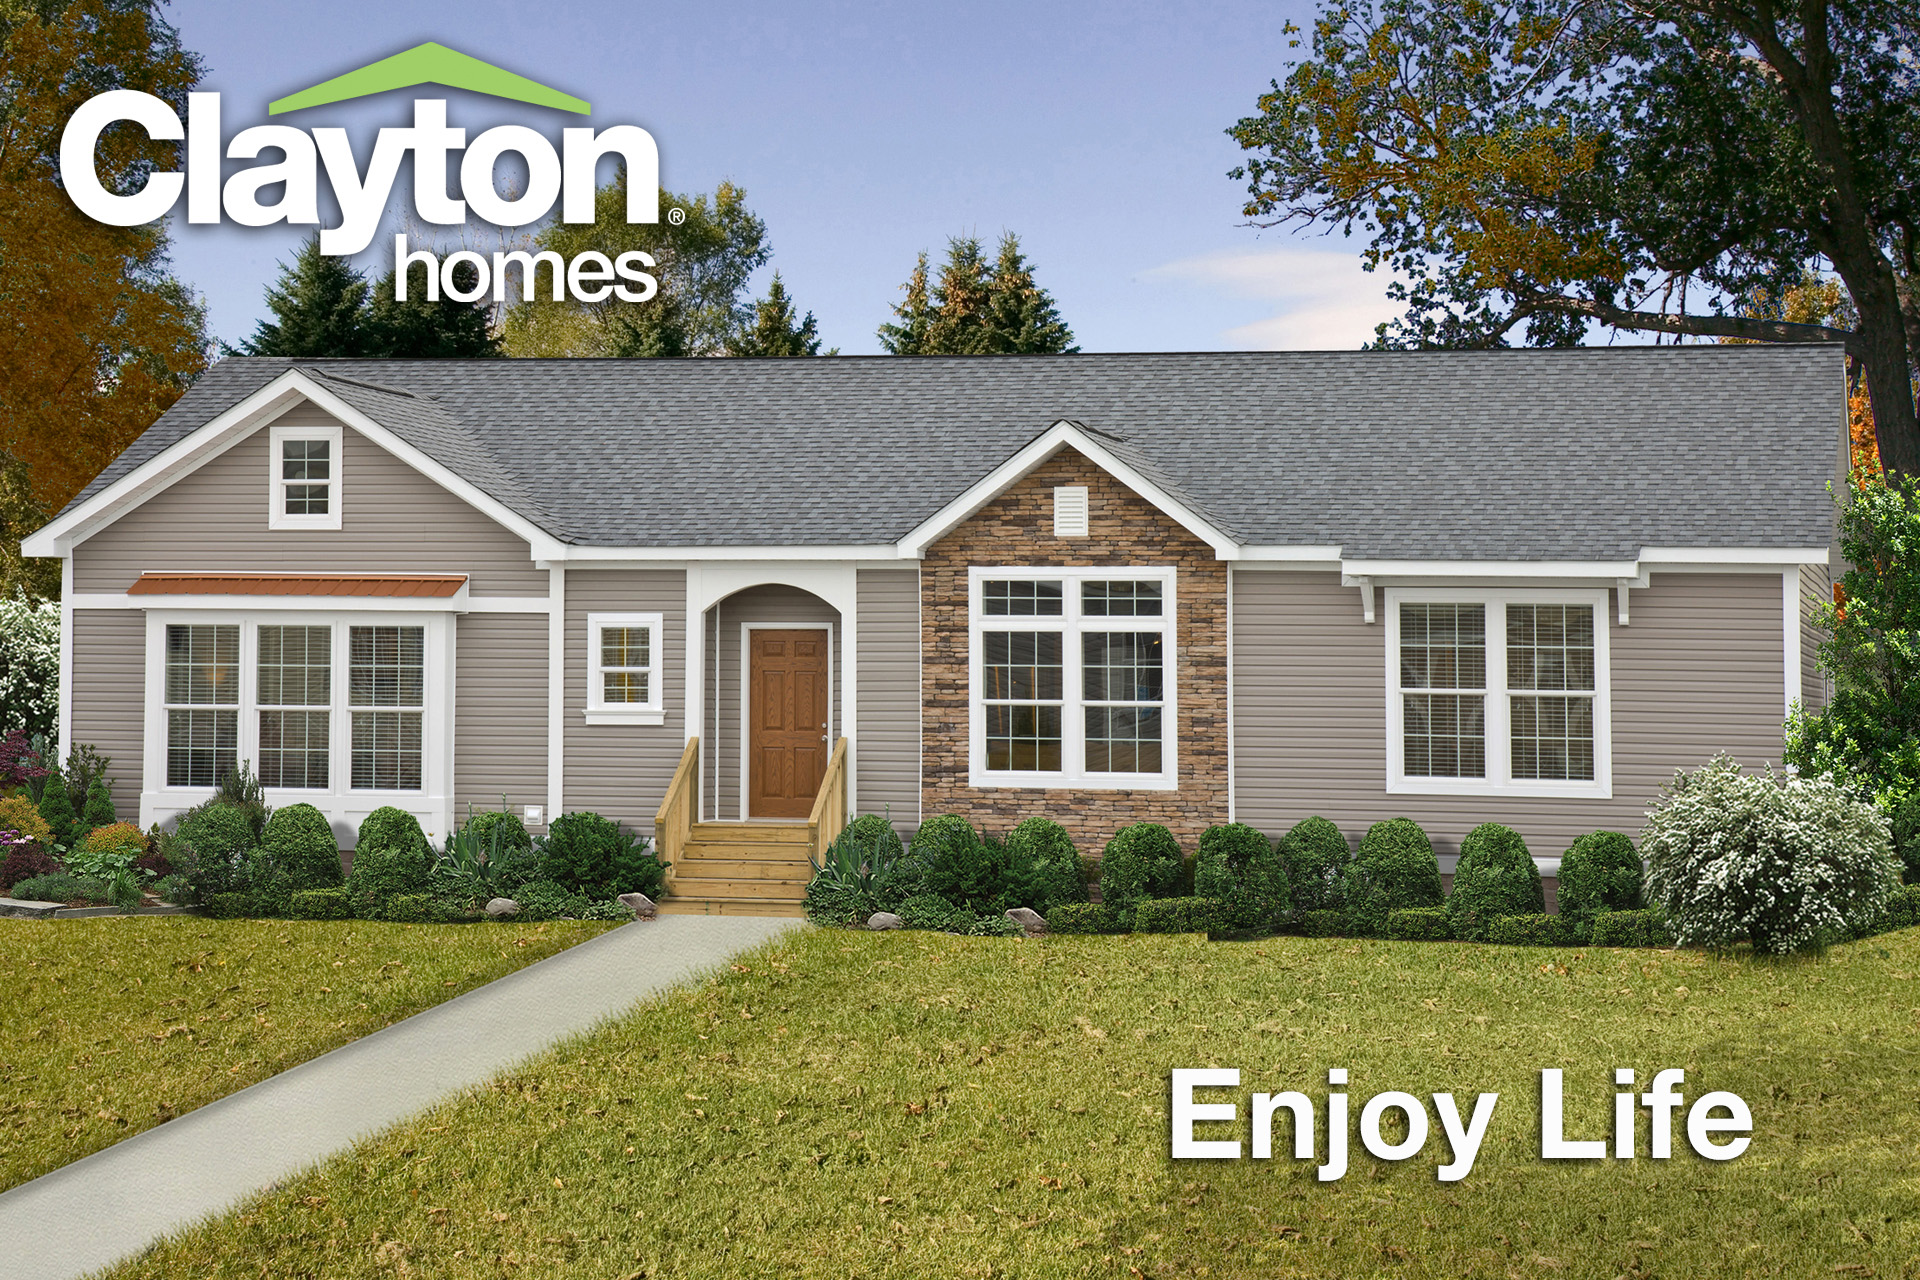 Clayton Homes Launches Enjoy Life Sweepstakes for Football 